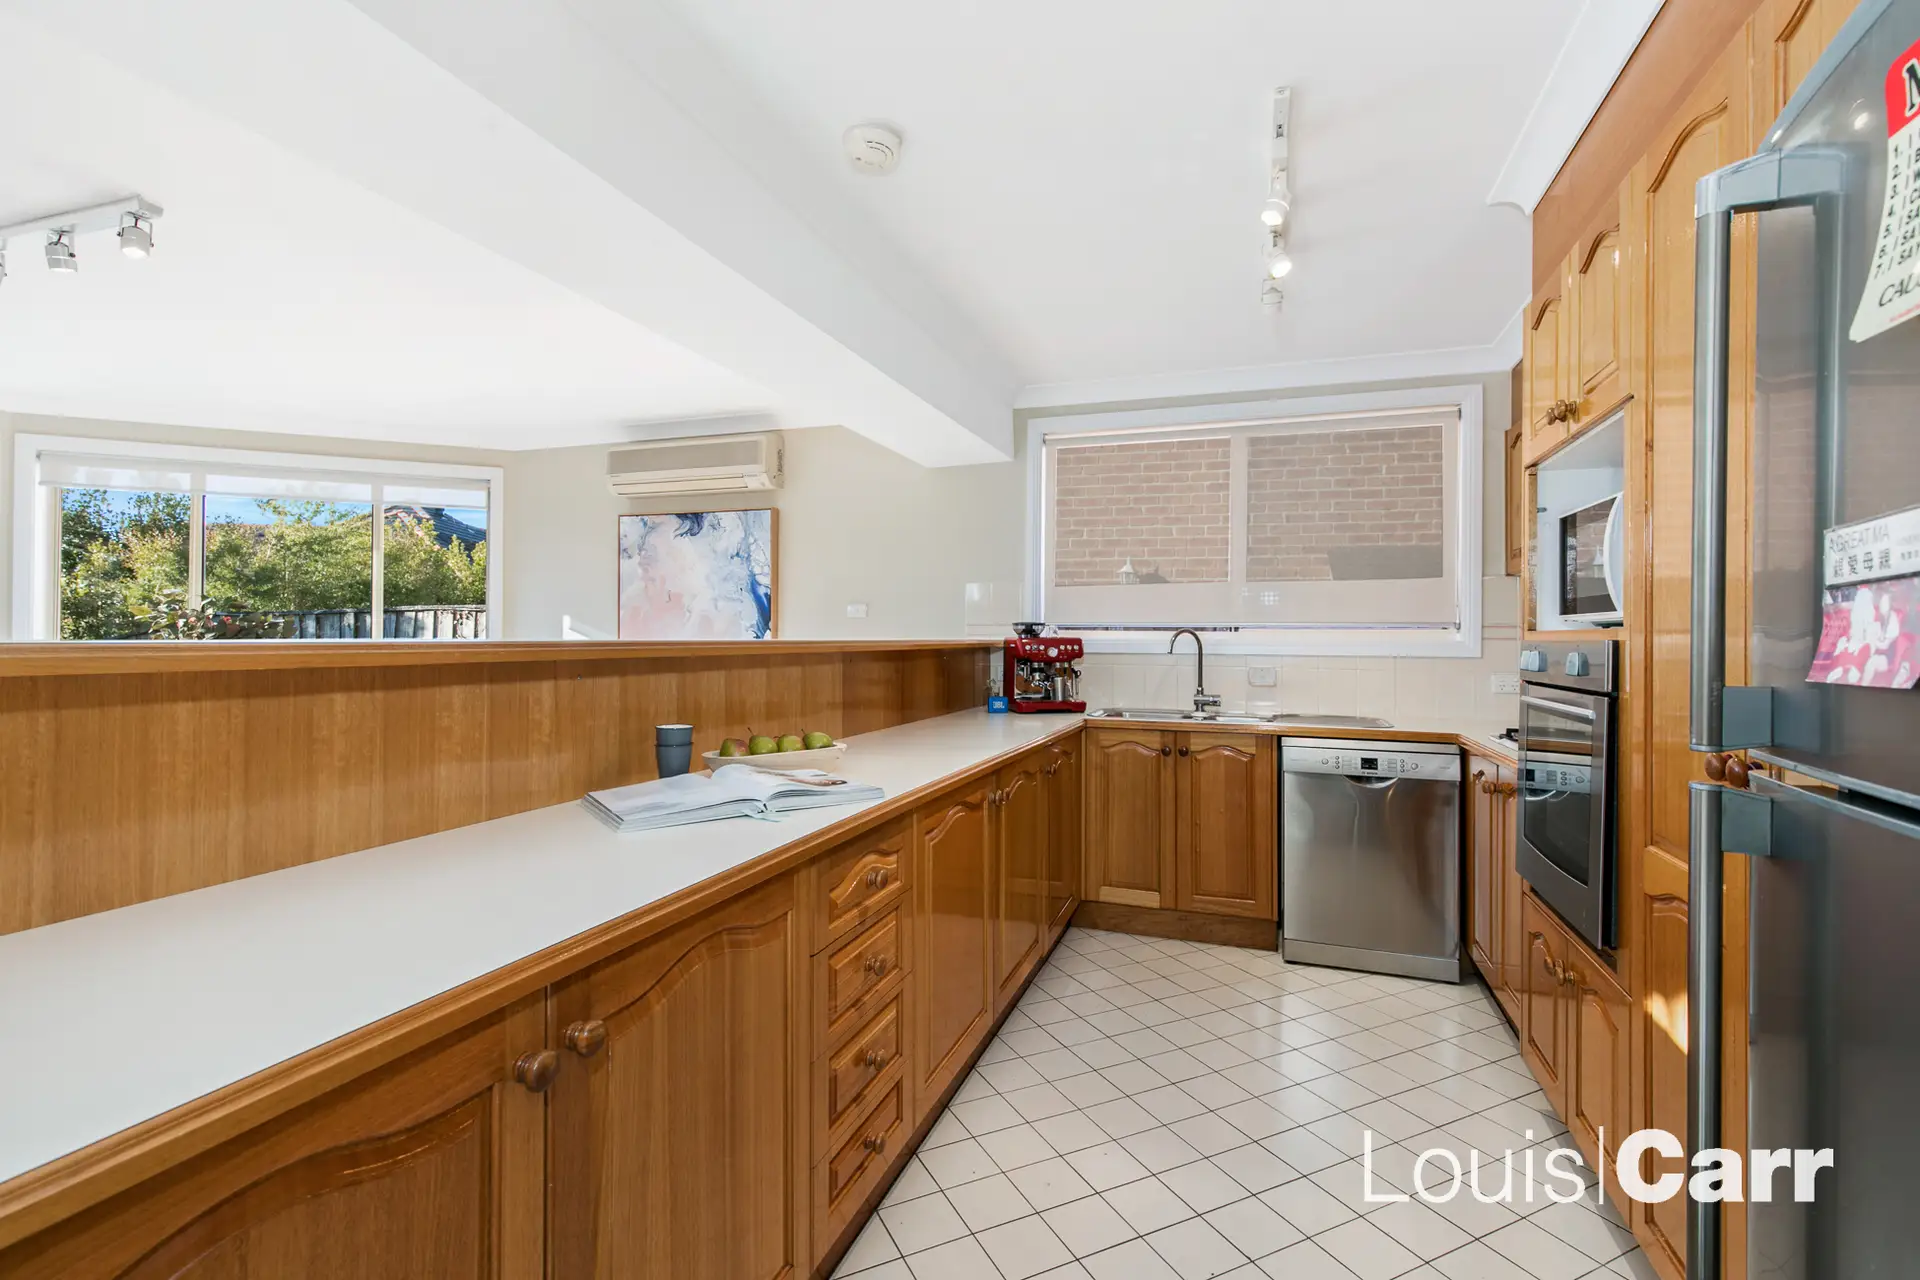 Photo #4: 16B Darlington Drive, Cherrybrook - Sold by Louis Carr Real Estate